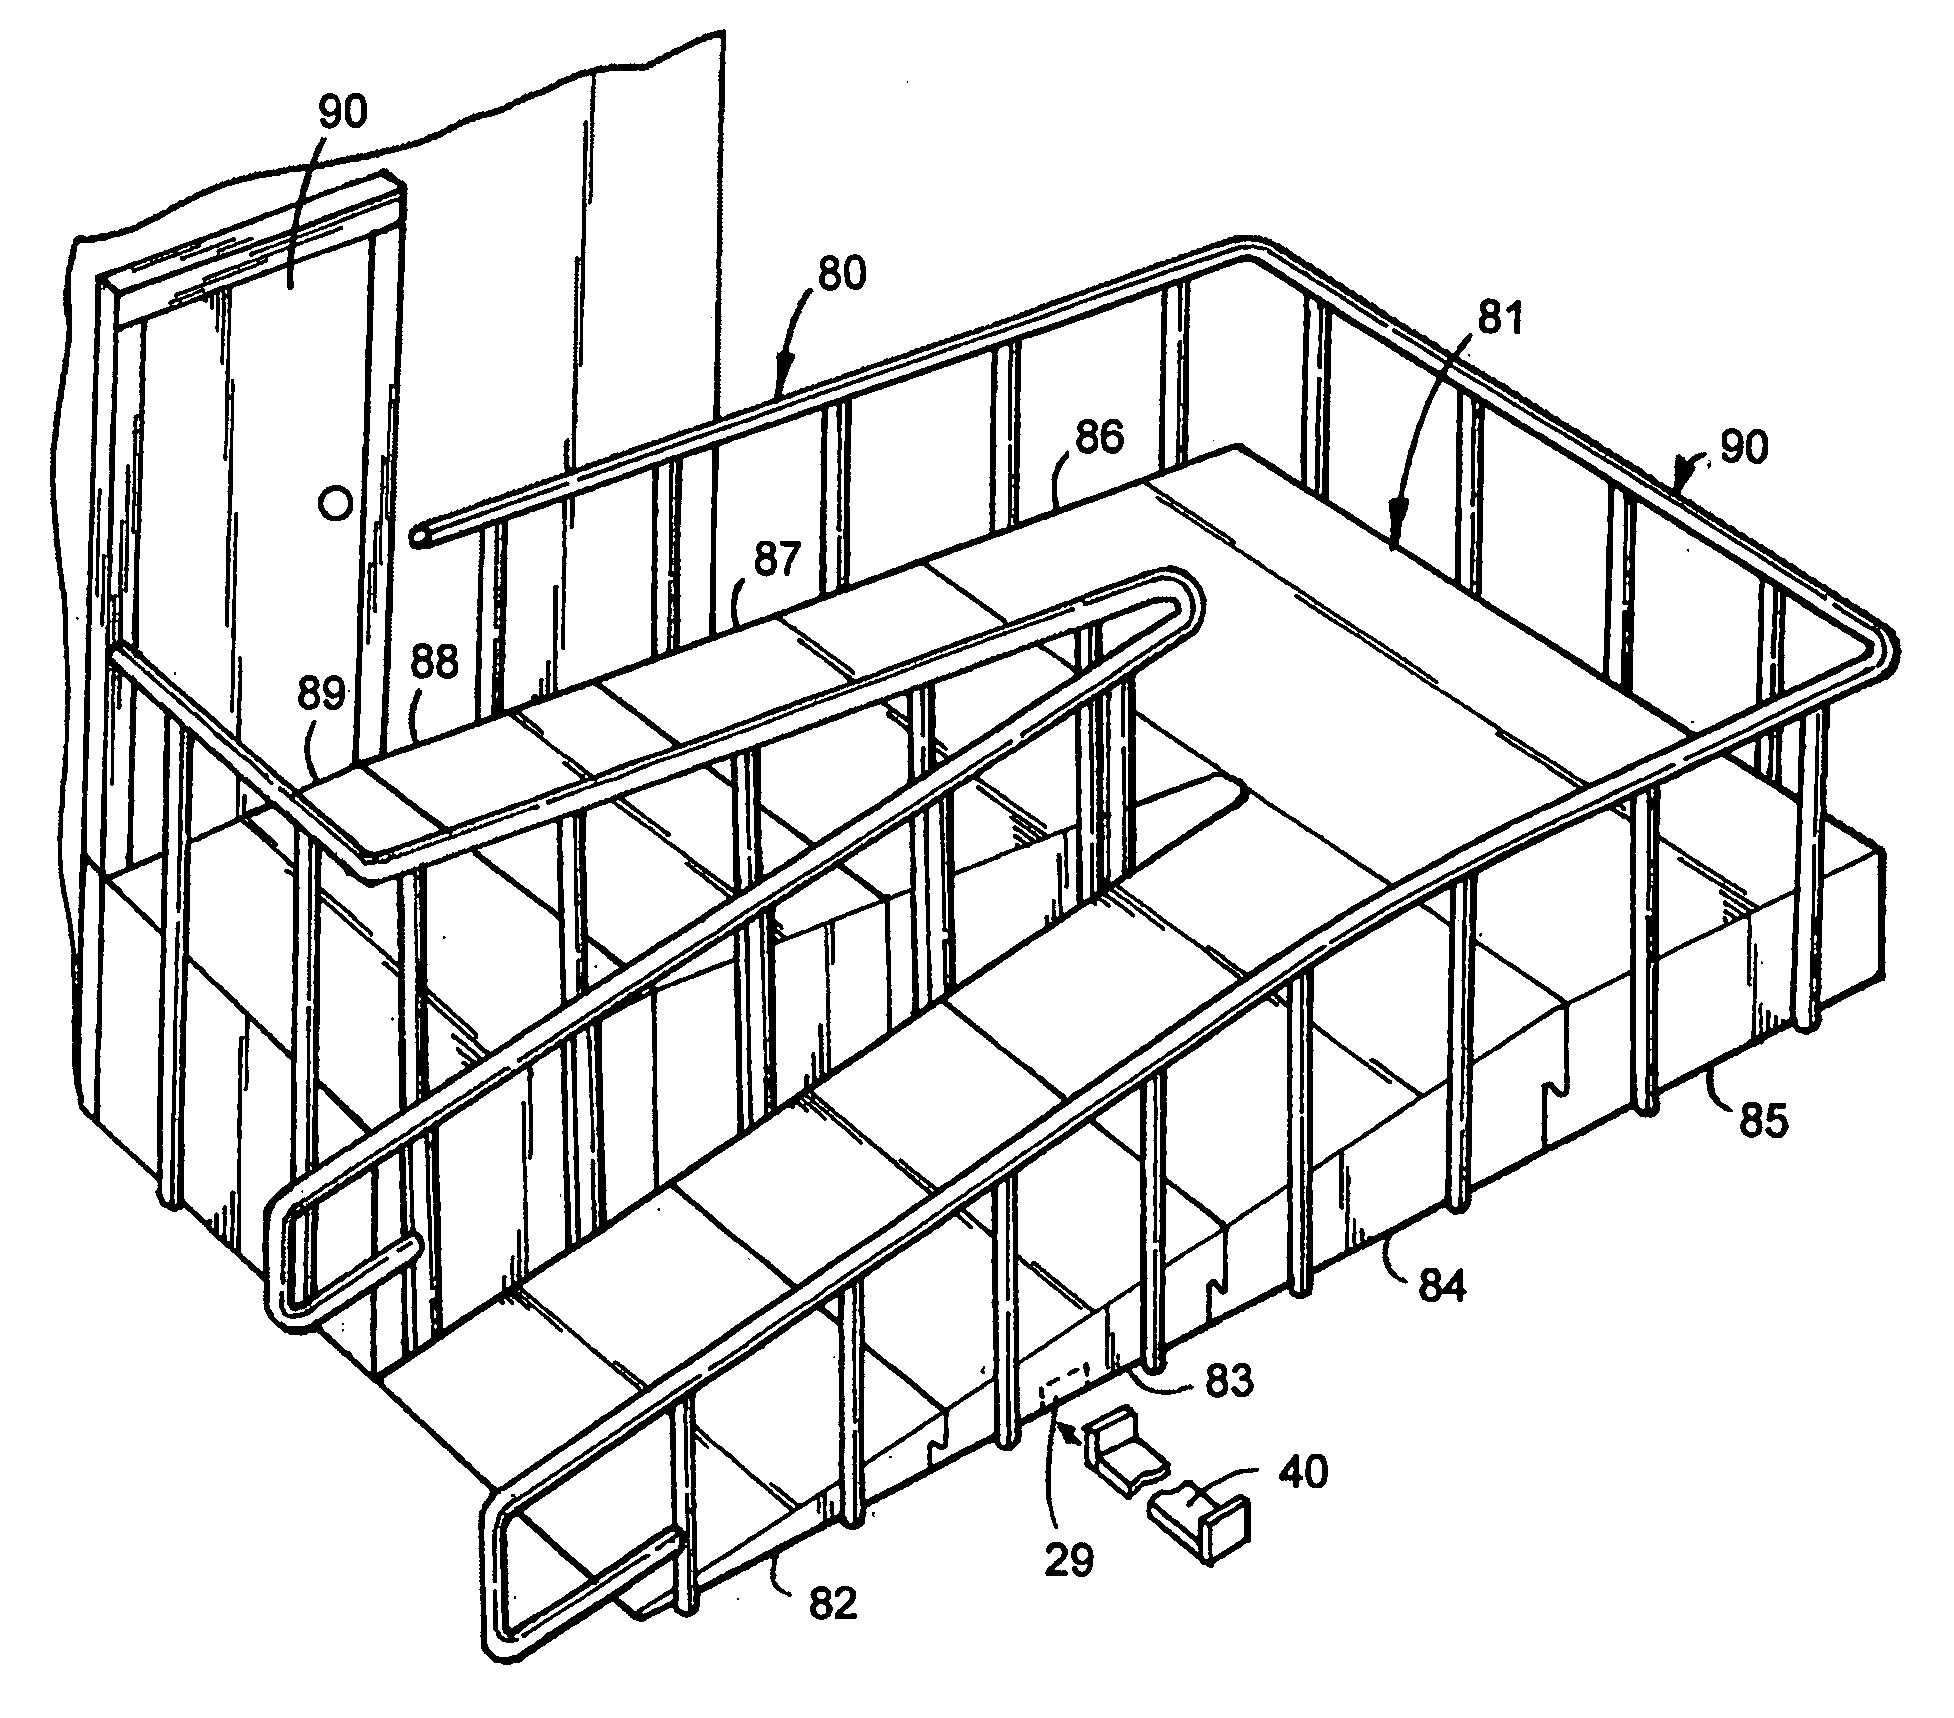 Rearrangeable interconnectable system for handicap ramps and platforms